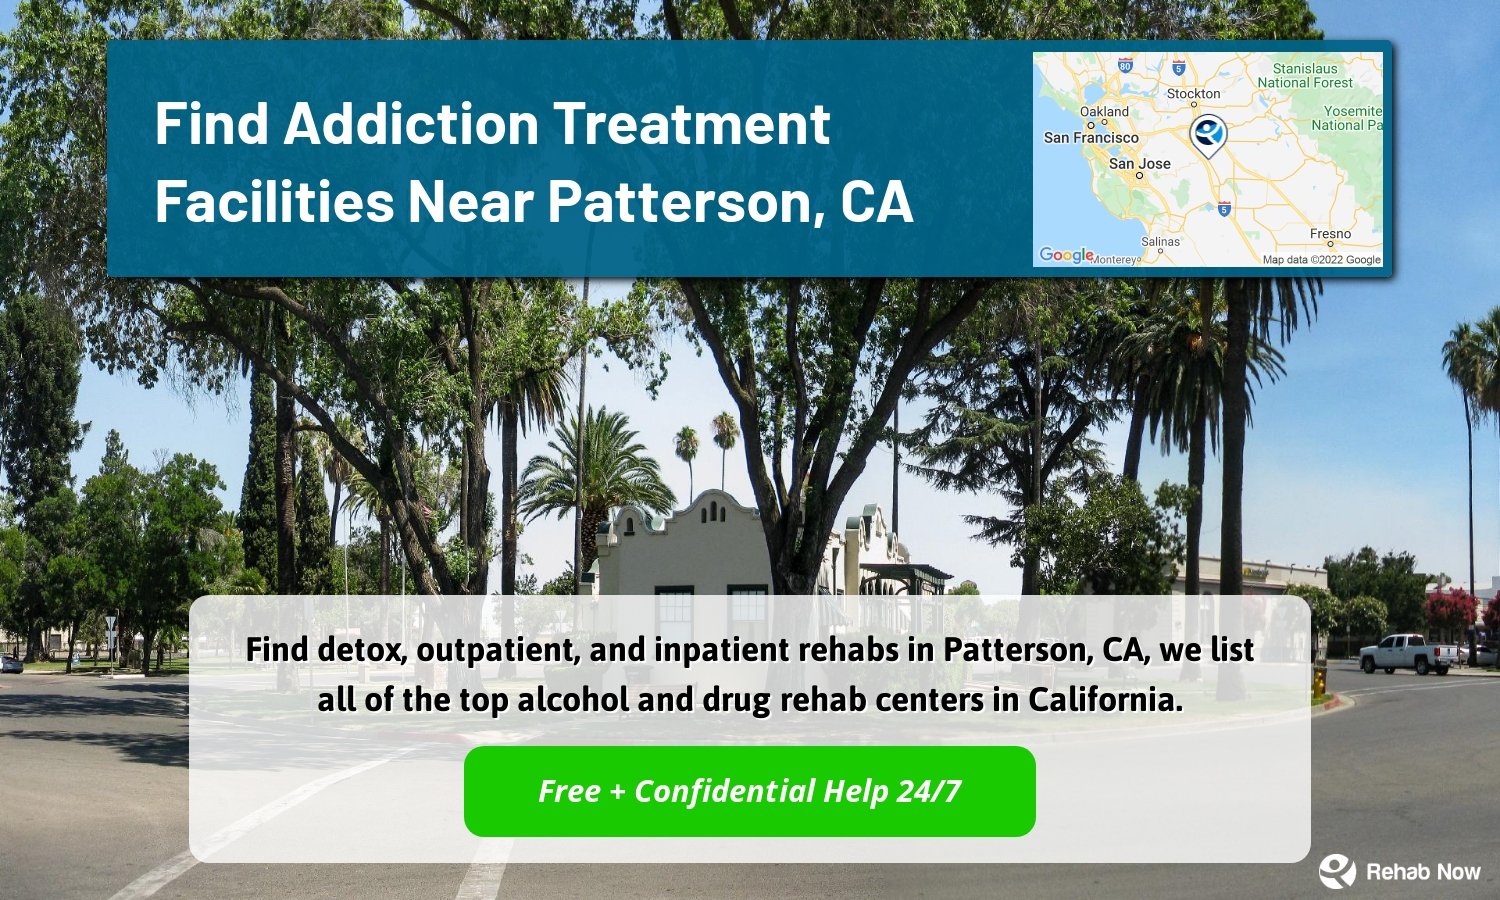 Find detox, outpatient, and inpatient rehabs in Patterson, CA, we list all of the top alcohol and drug rehab centers in California.